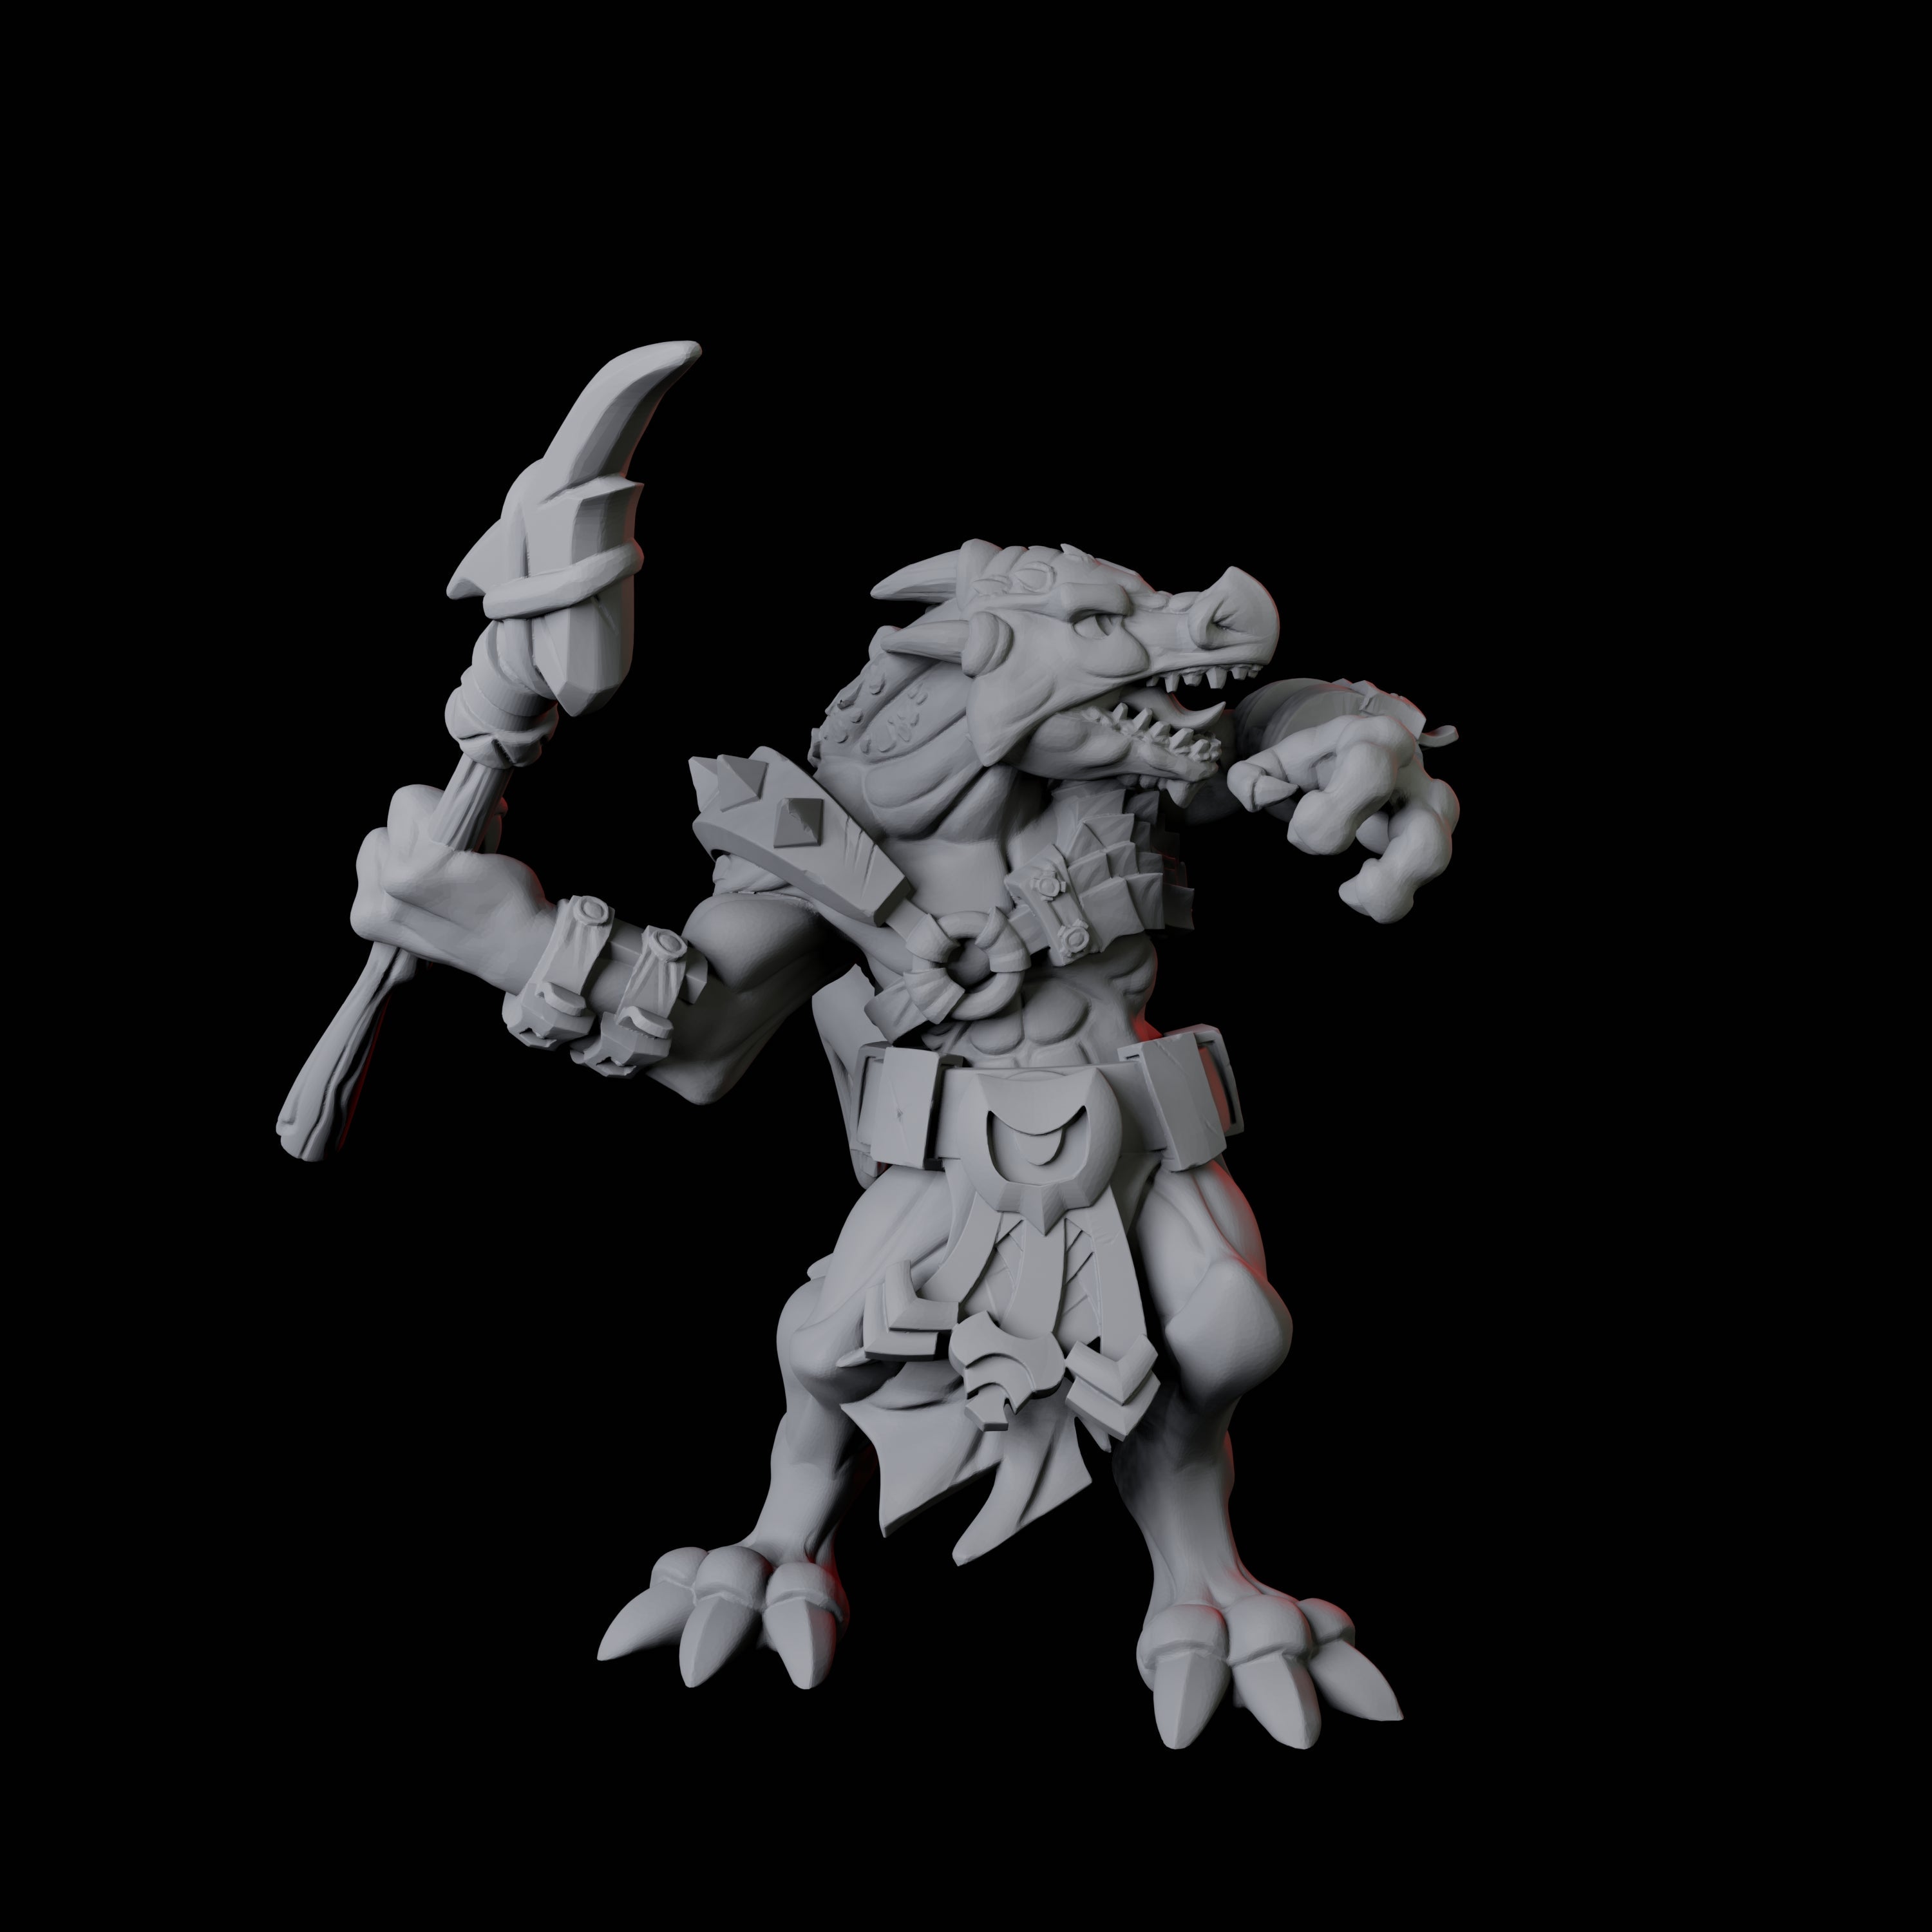 Kobold Ranger B Miniature for Dungeons and Dragons, Pathfinder or other TTRPGs